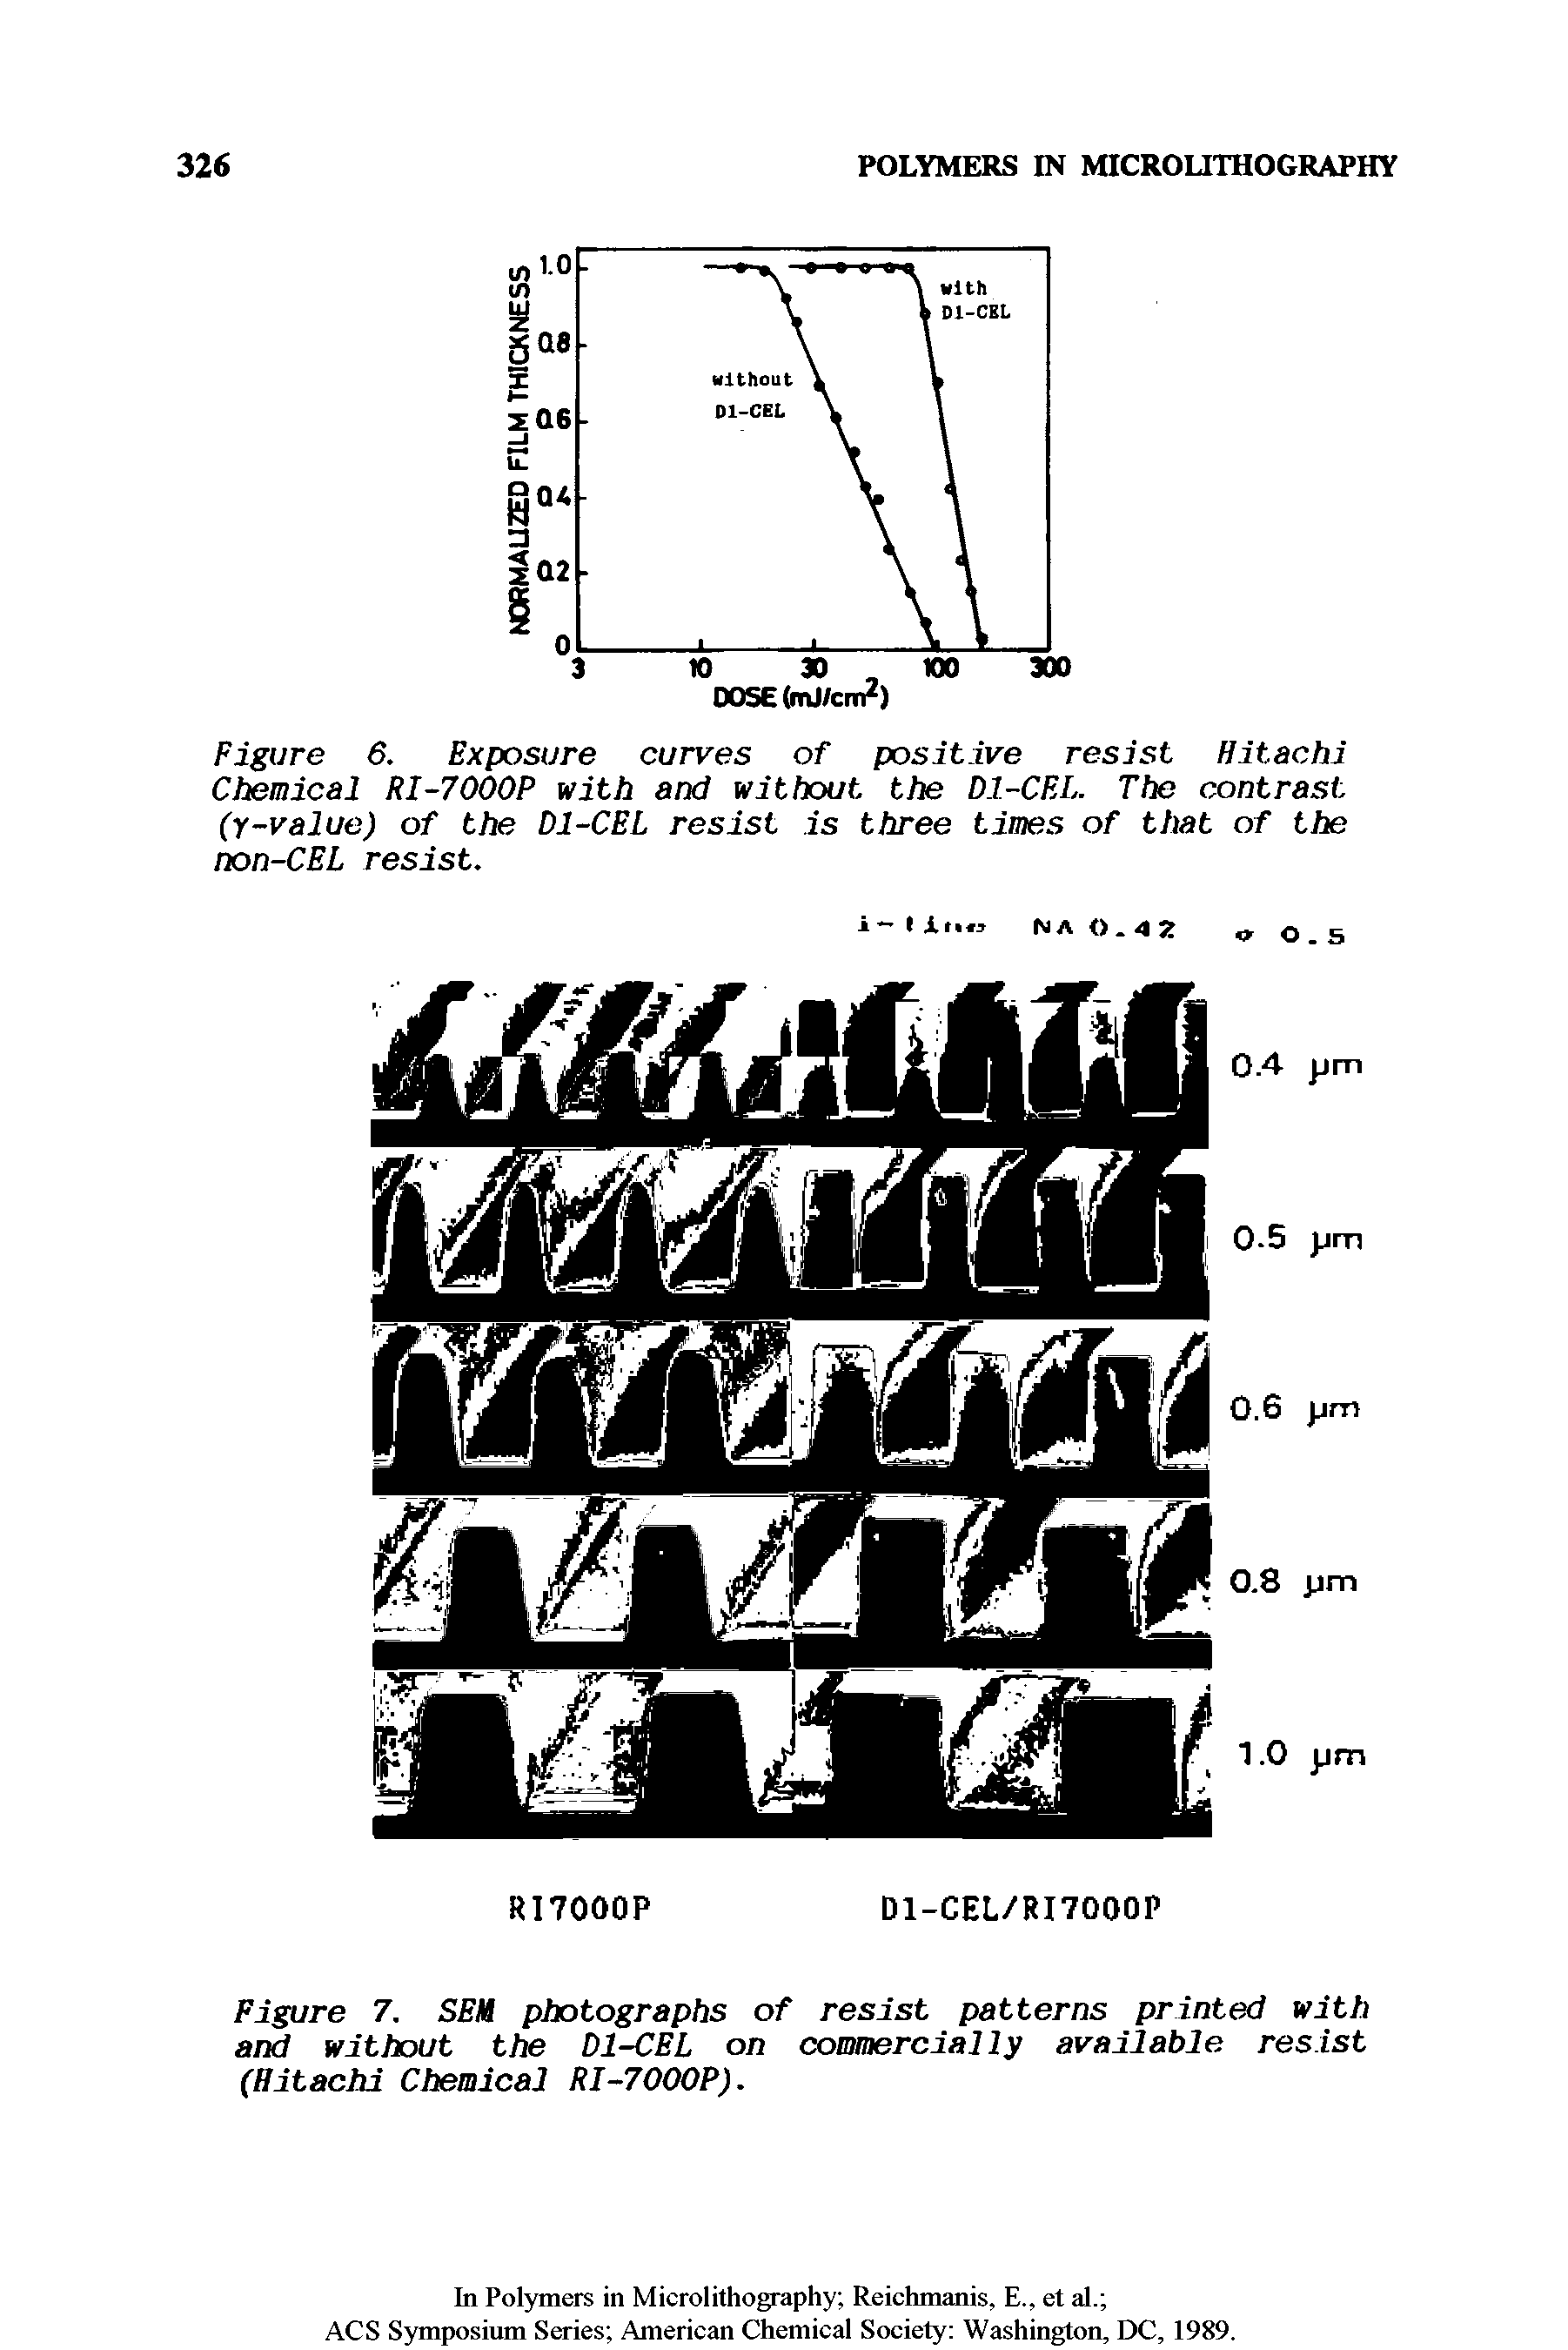 Figure 7. SEU photographs of resist patterns printed with and without the Dl-CEL on commercially available resist (Hitachi Chemical RI-7000P).